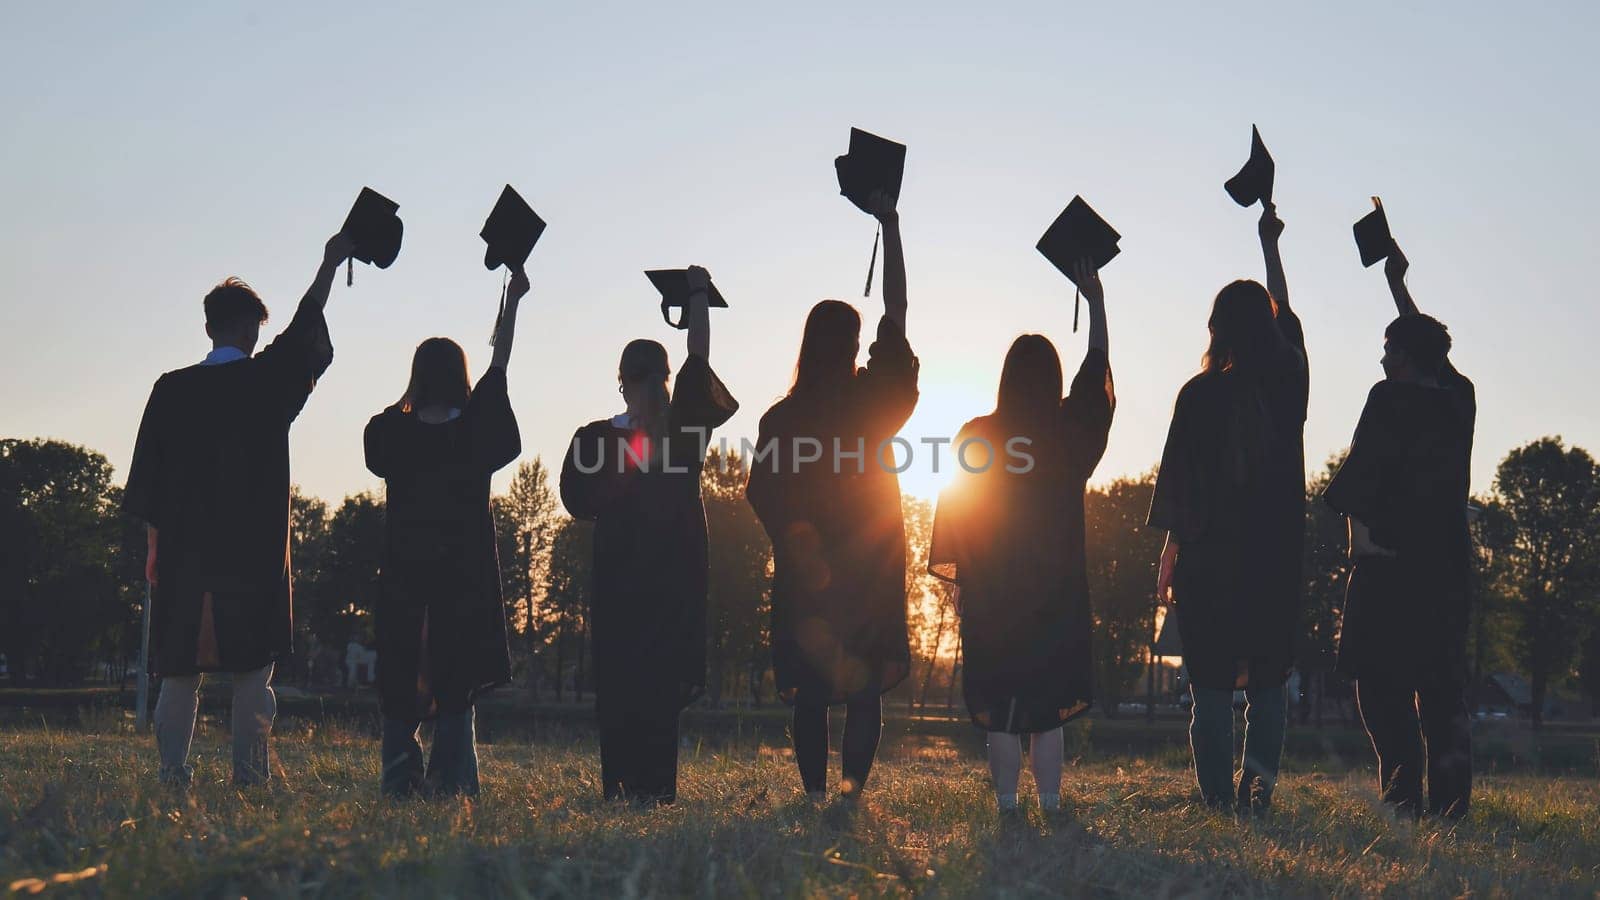 Silhouettes of college graduates waving their caps at sunset. by DovidPro